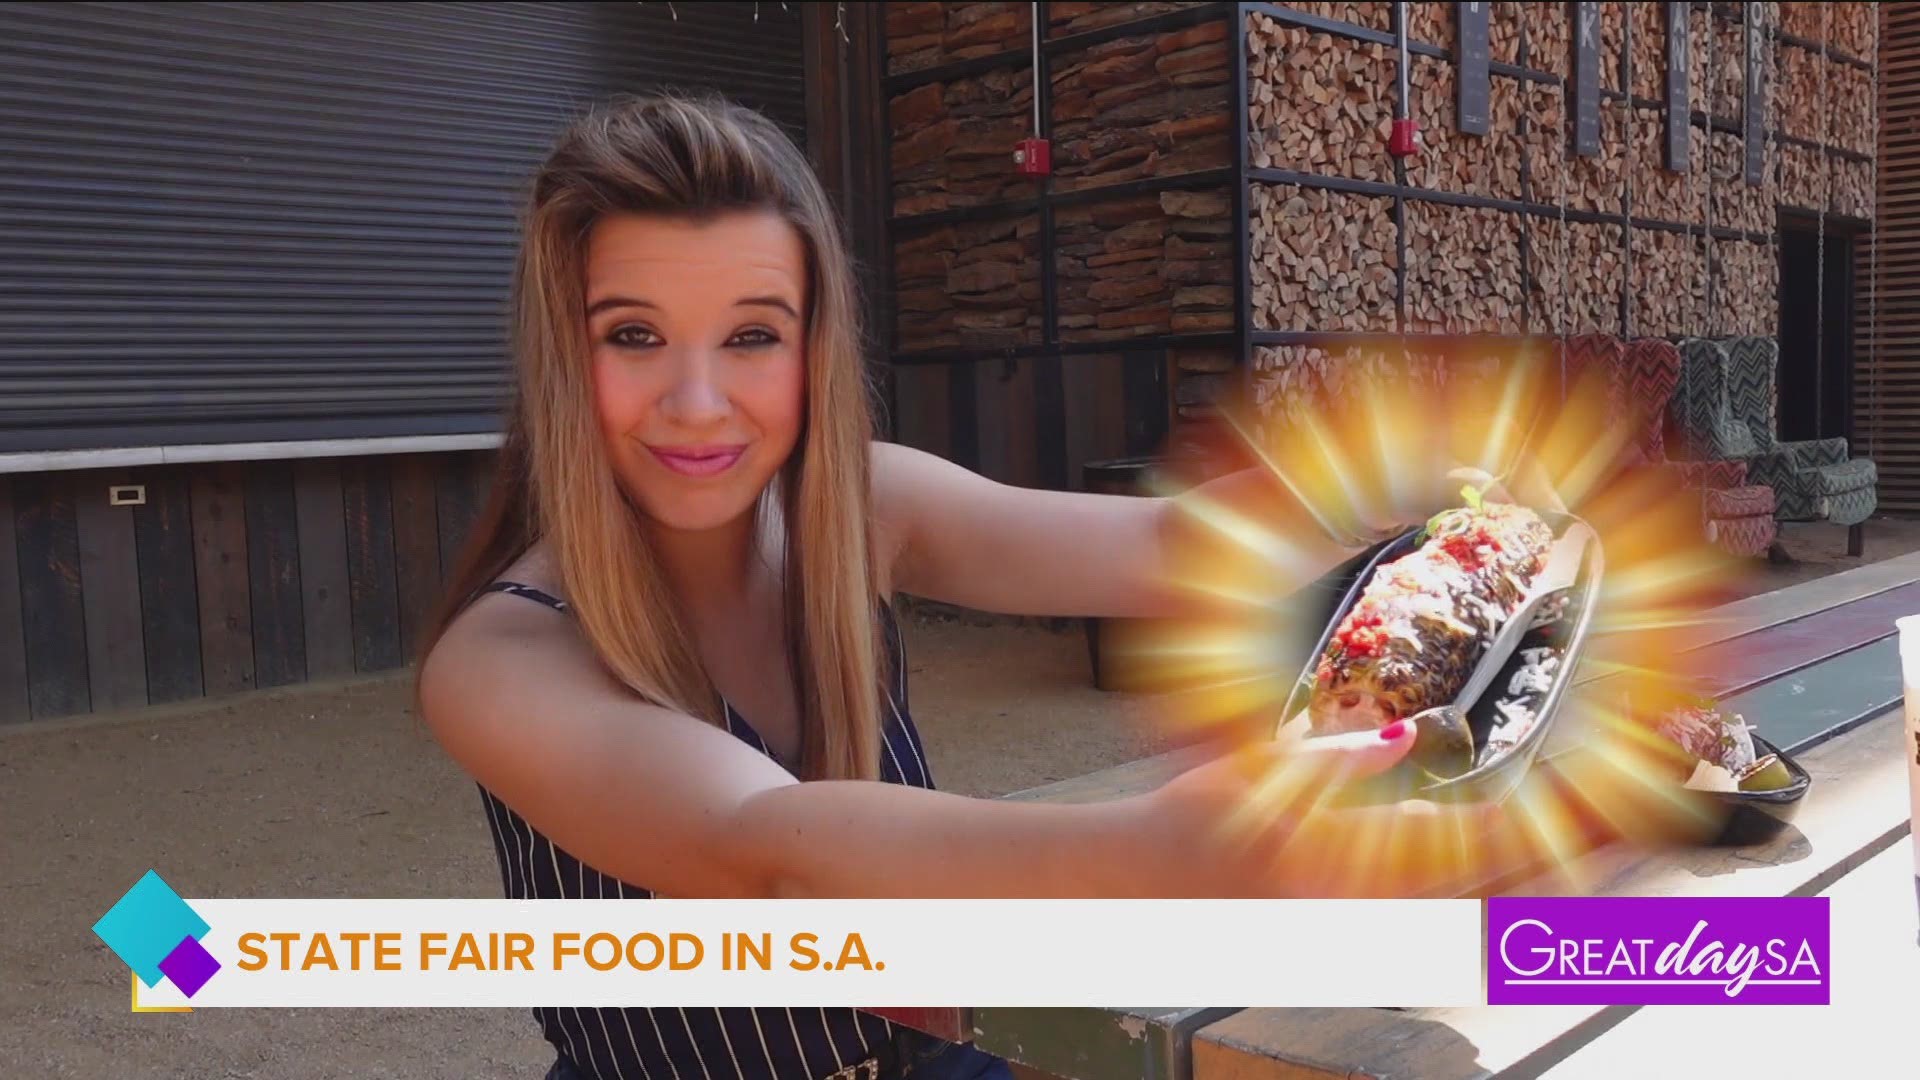 Digital reporter Lexi Hazlett samples the limited-time fair food on offer at the Rustic San Antonio.